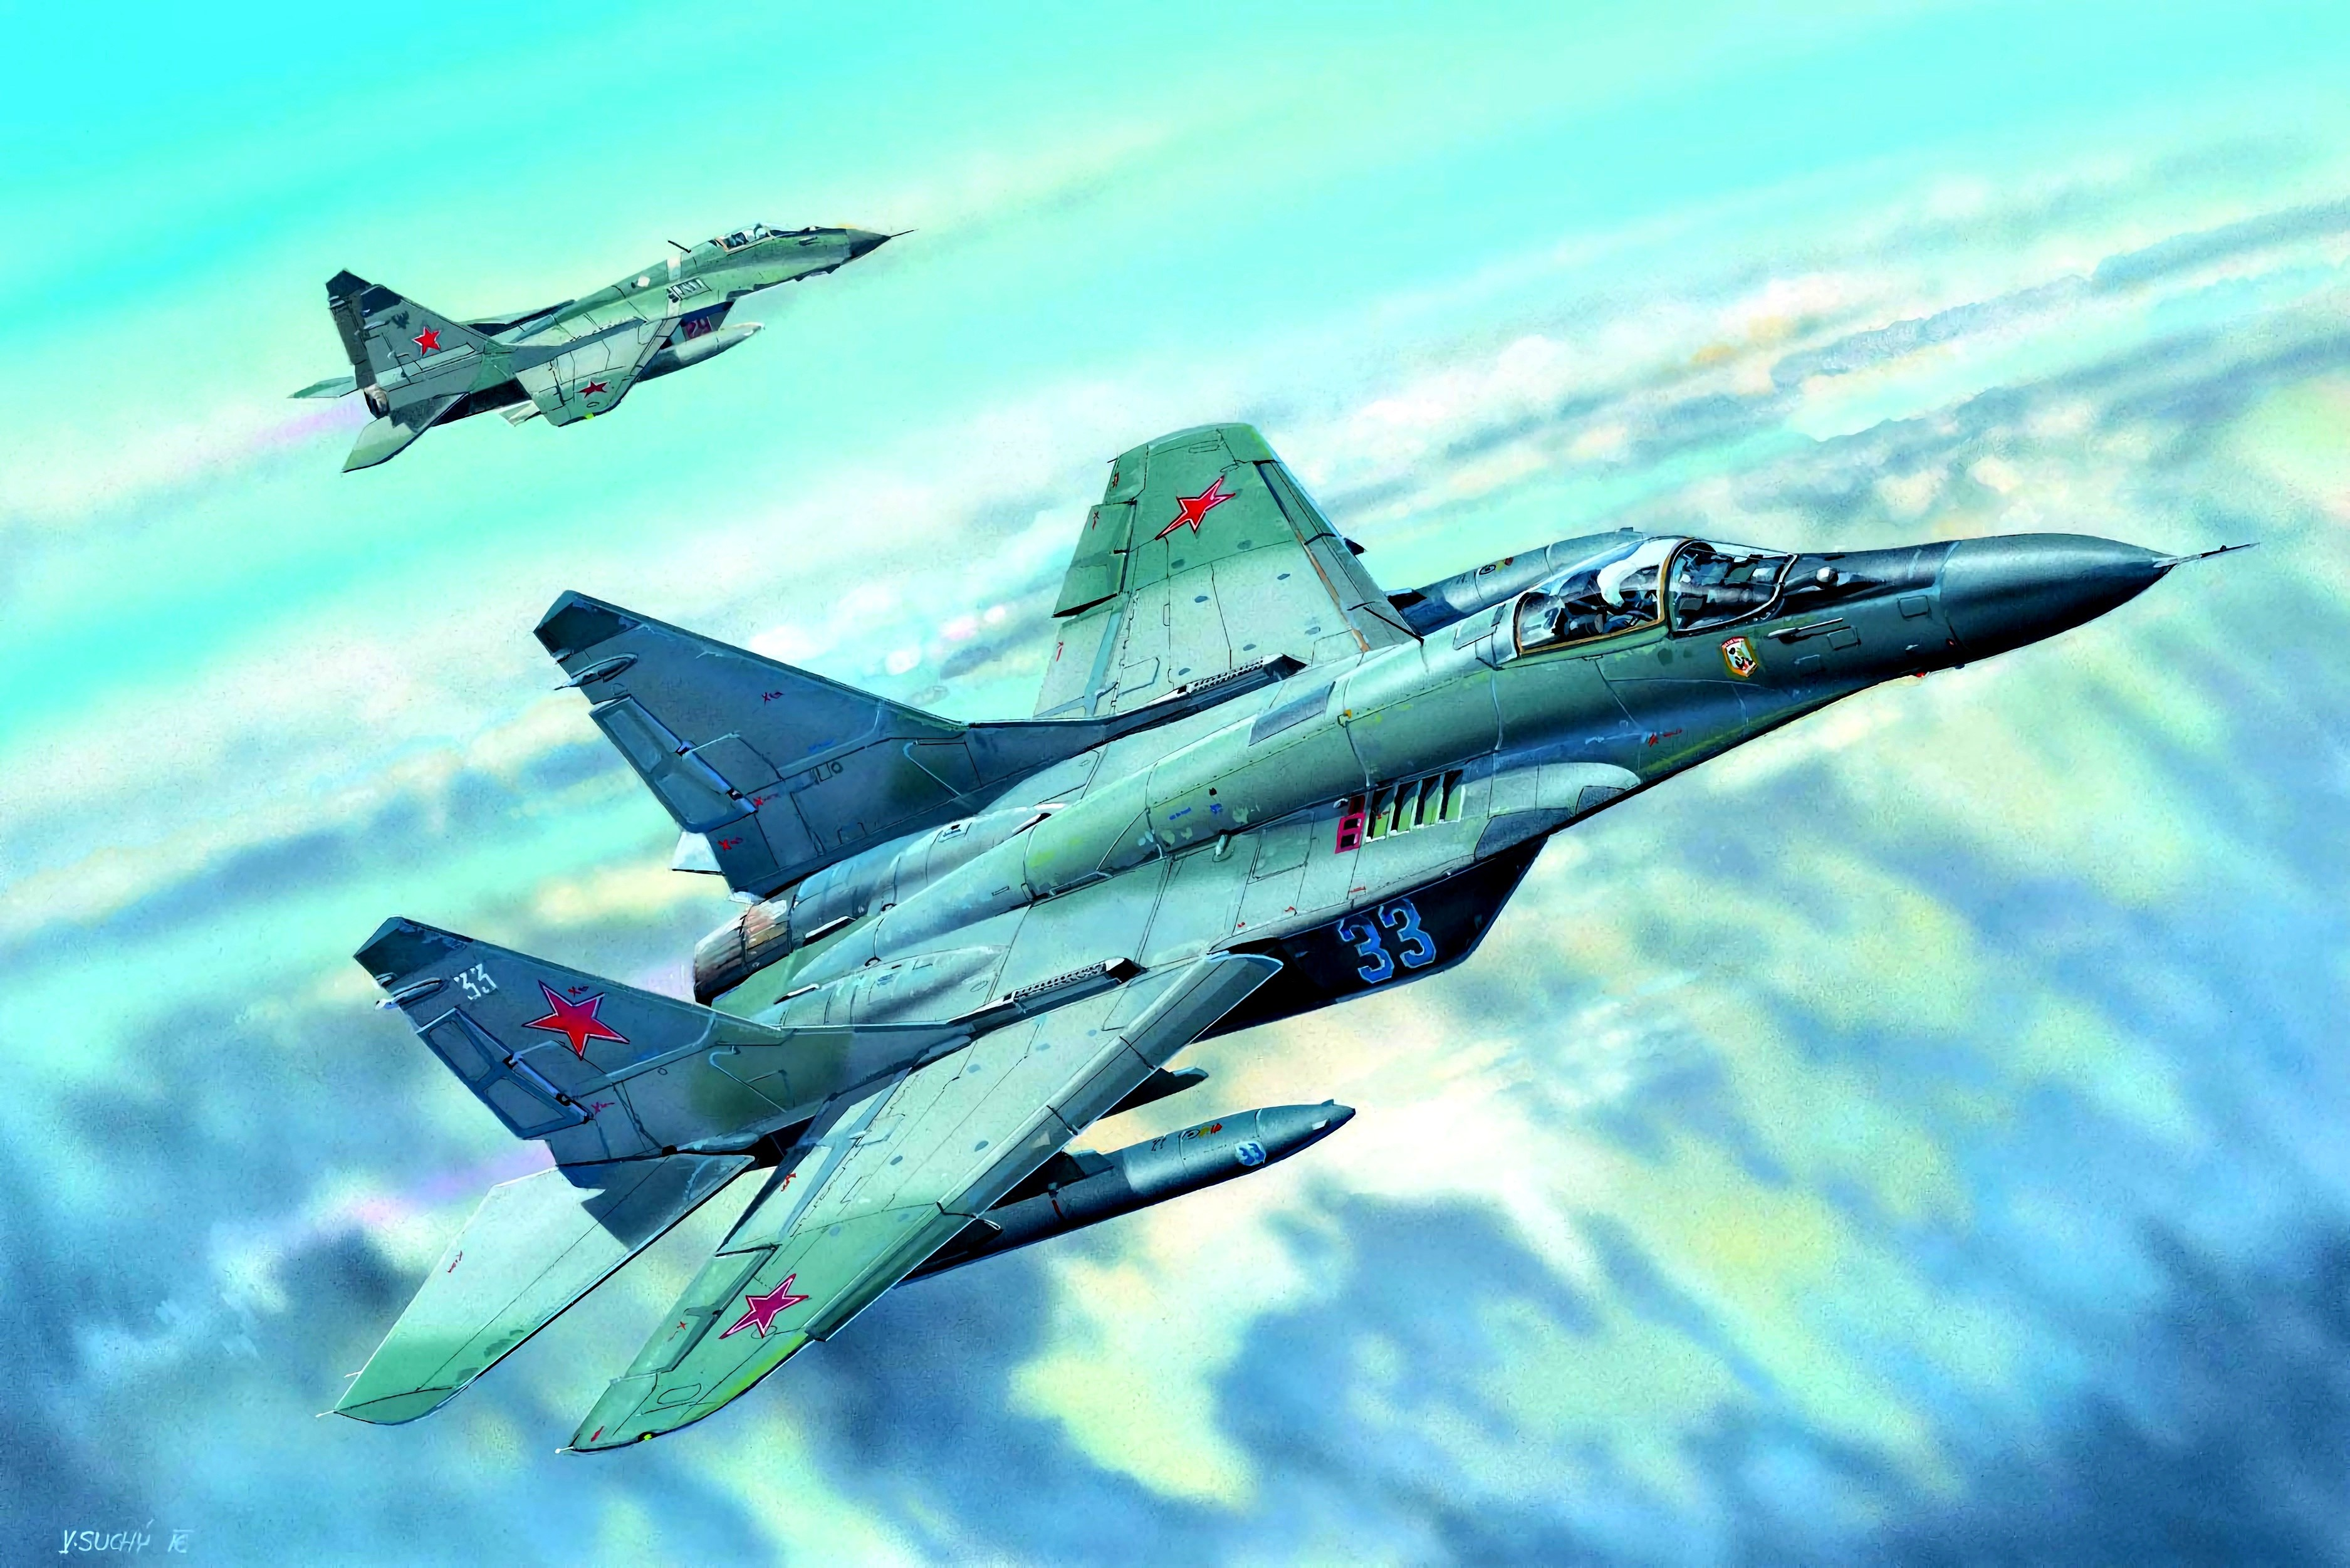 General 3750x2502 jet fighter sky clouds red star military air force aircraft Mikoyan MiG-29 Russian Air Force flying Boxart signature artwork Russian/Soviet aircraft